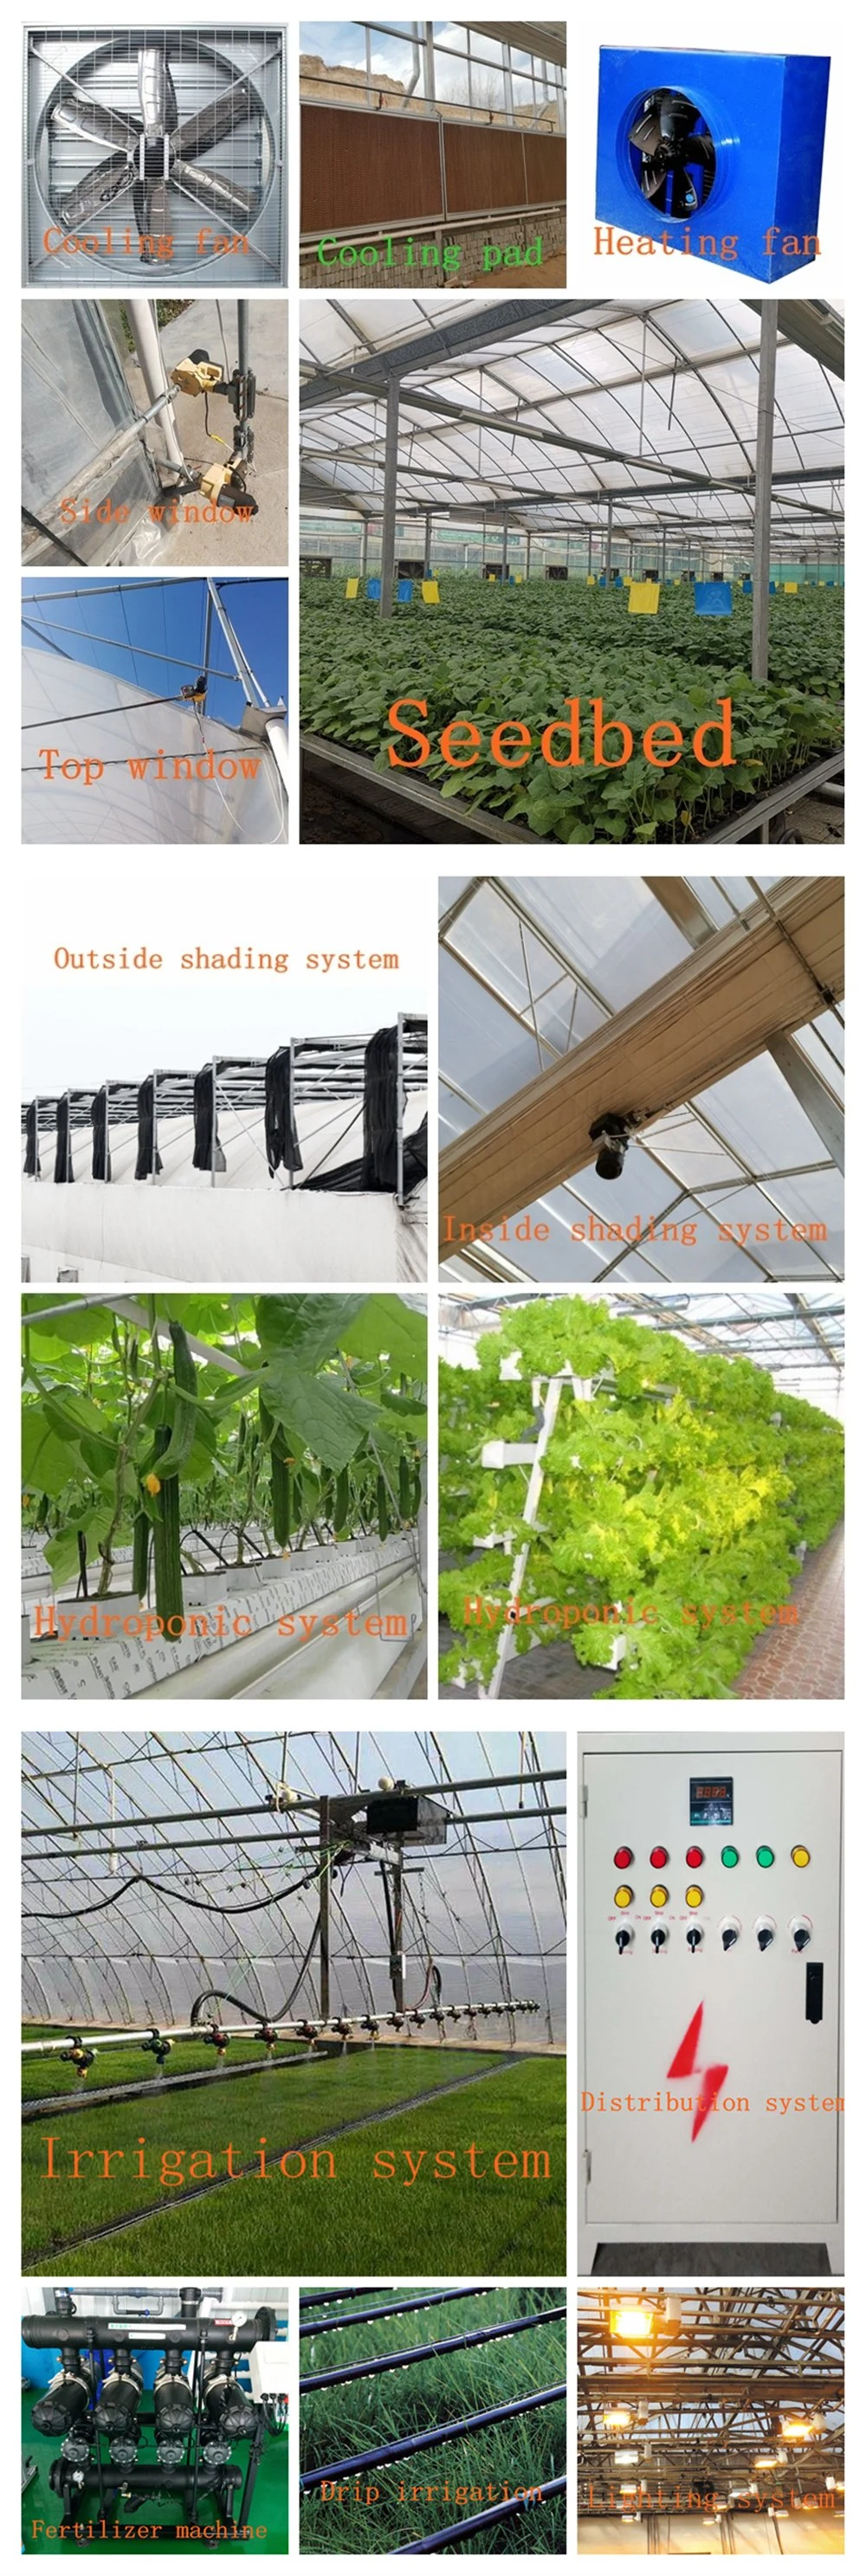 Multi-Span Plastic Film Covering Tropical Hydroponic Growing/Planting/Farming Greenhouse for Vegetables/Flowers/Cucumbers/Tomatoes